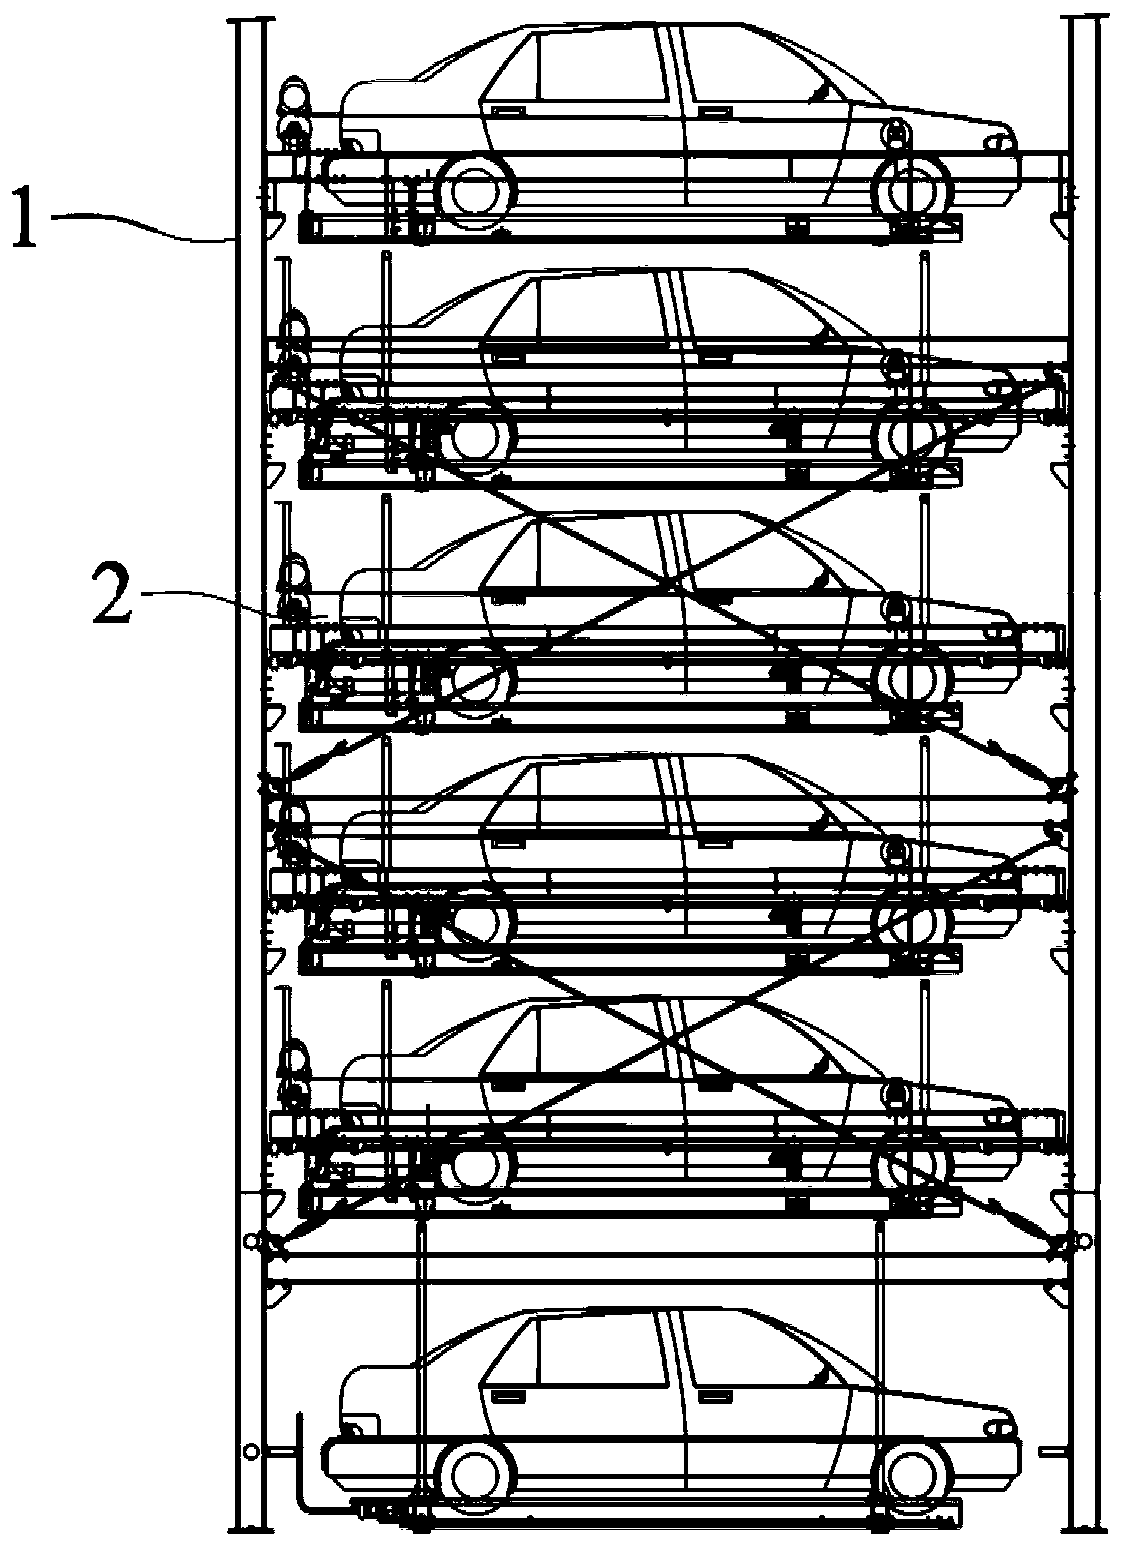 Efficient and stable vehicle parking and taking method